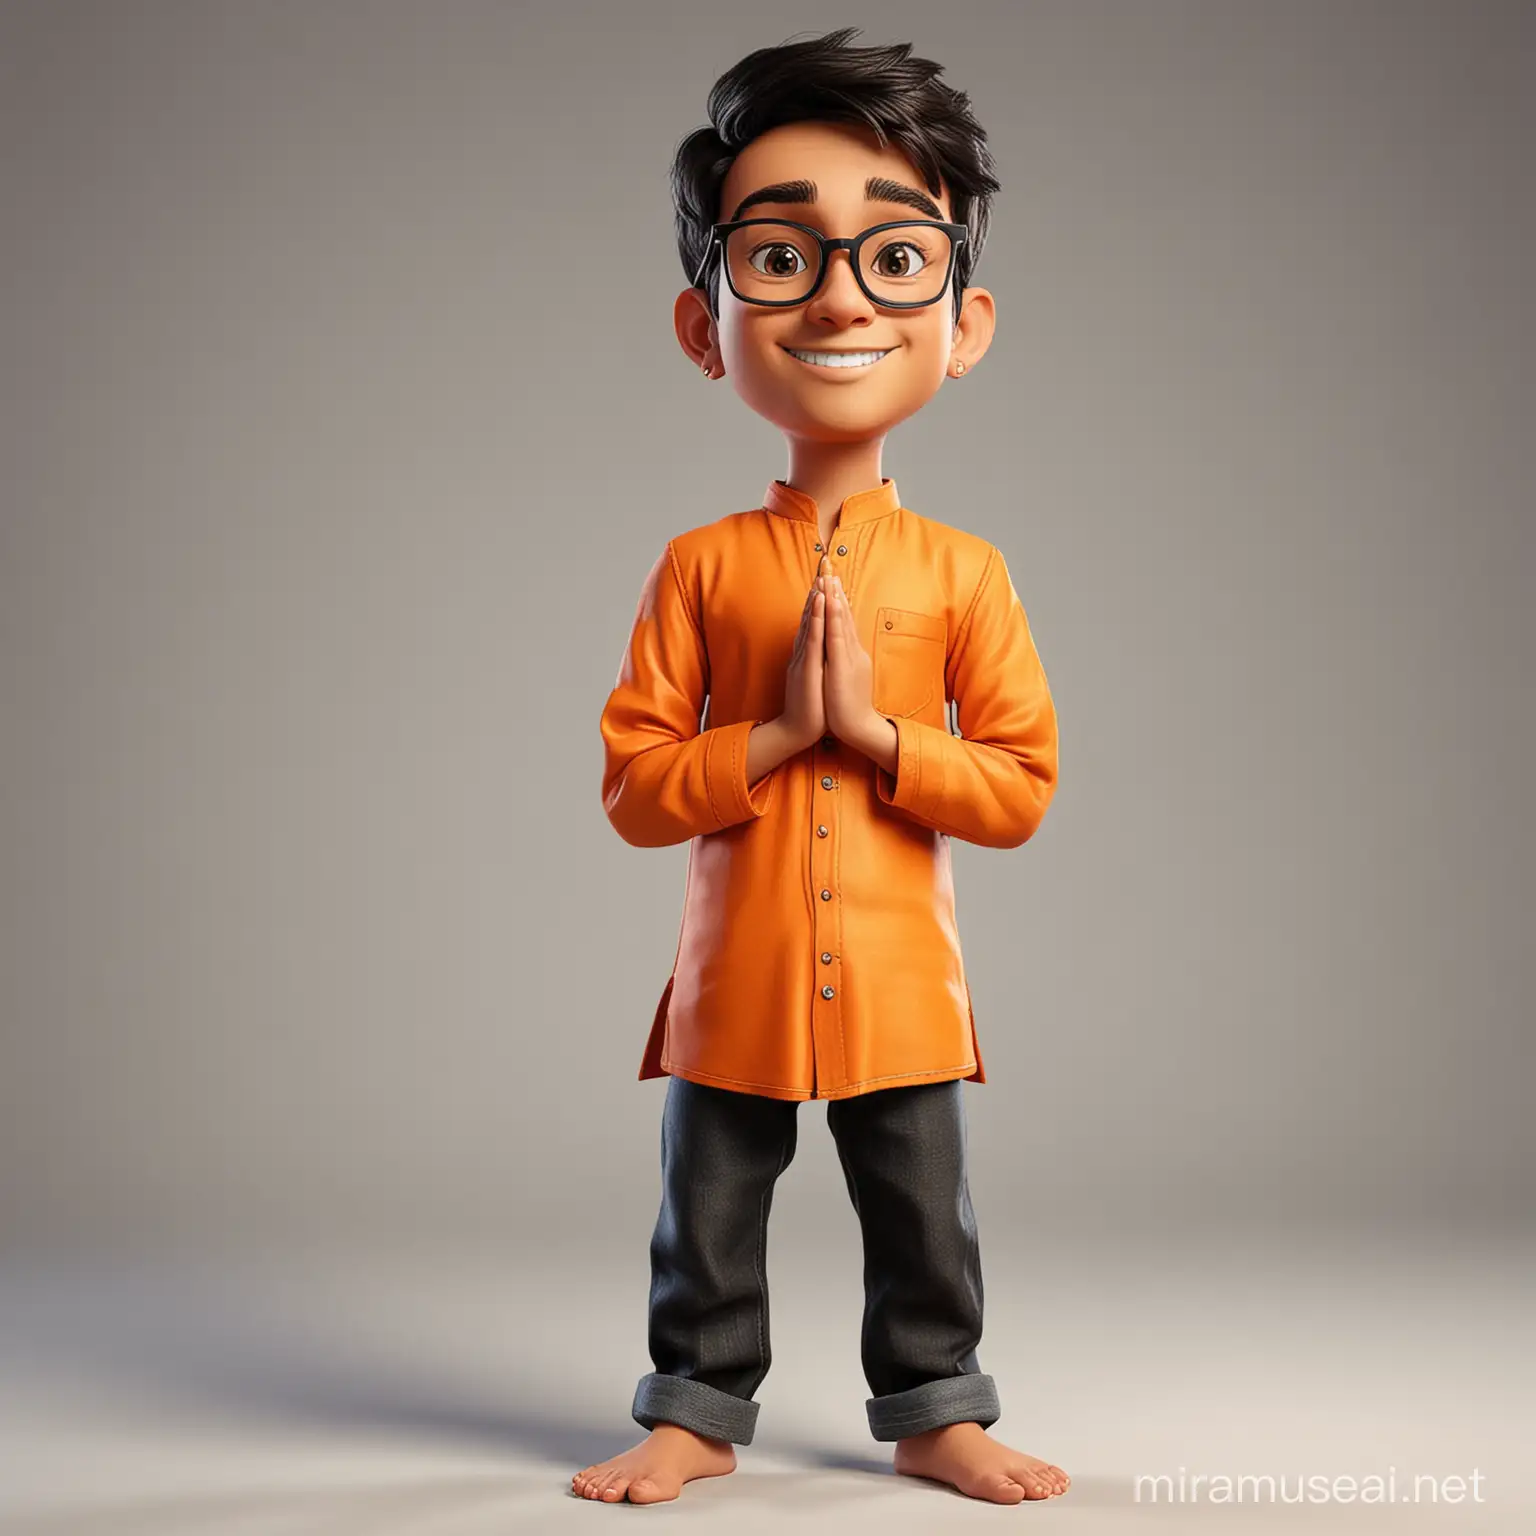 create a caricature of a teenage boy standing with Folding Hands (doing Namaste) in orange traditional kurta and black jeans, waearing specs